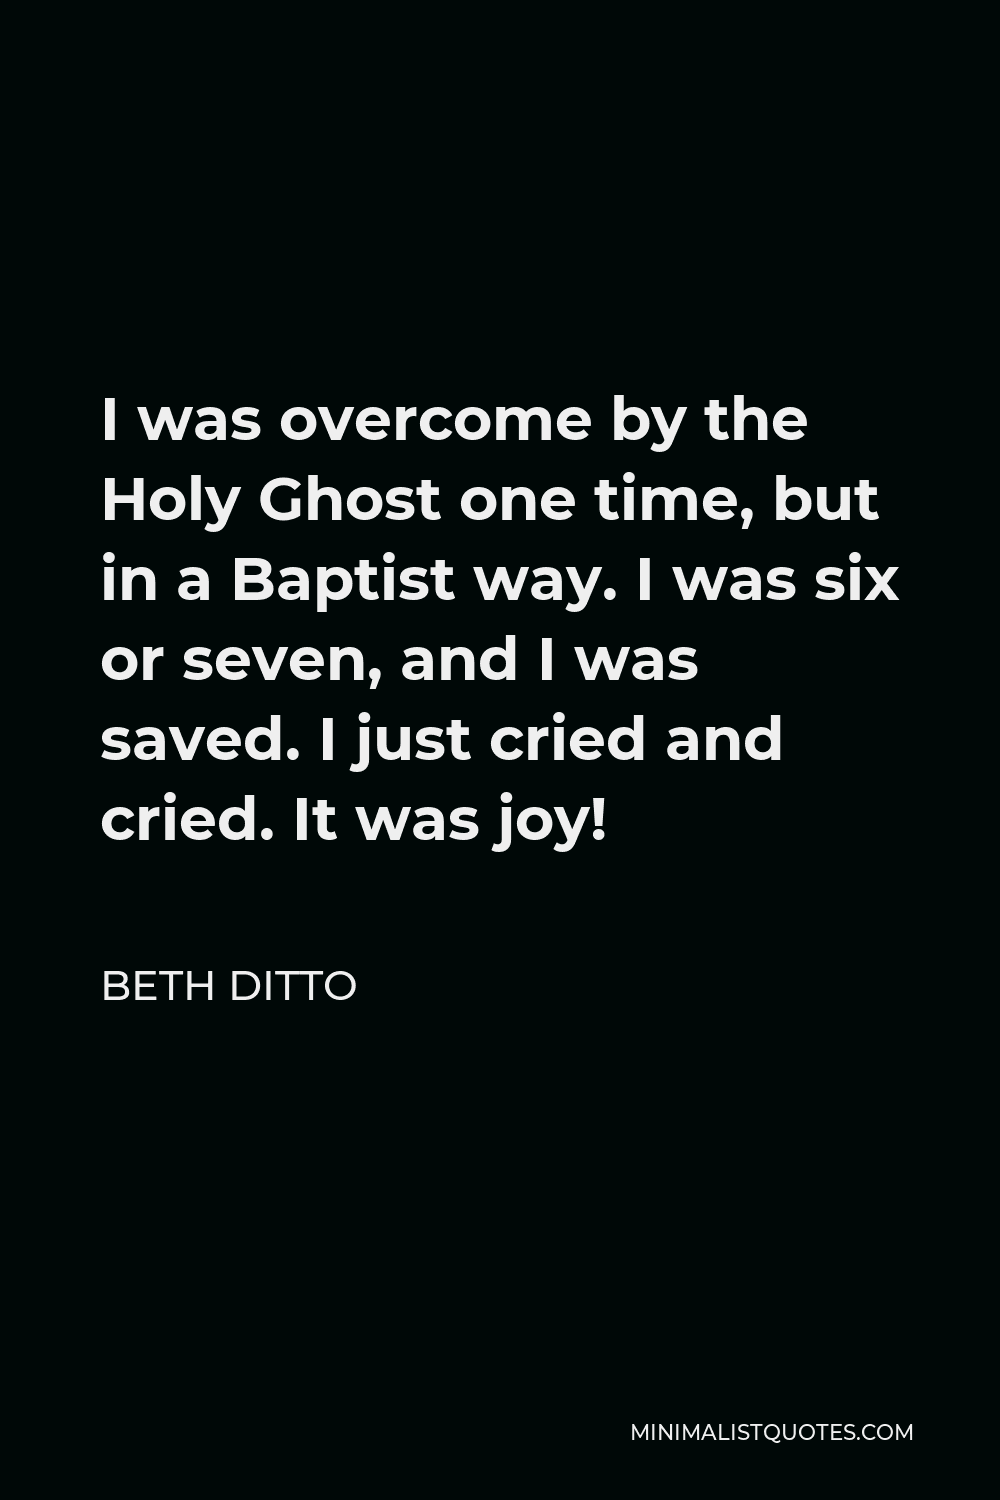 Beth Ditto Quote - I was overcome by the Holy Ghost one time, but in a Baptist way. I was six or seven, and I was saved. I just cried and cried. It was joy!